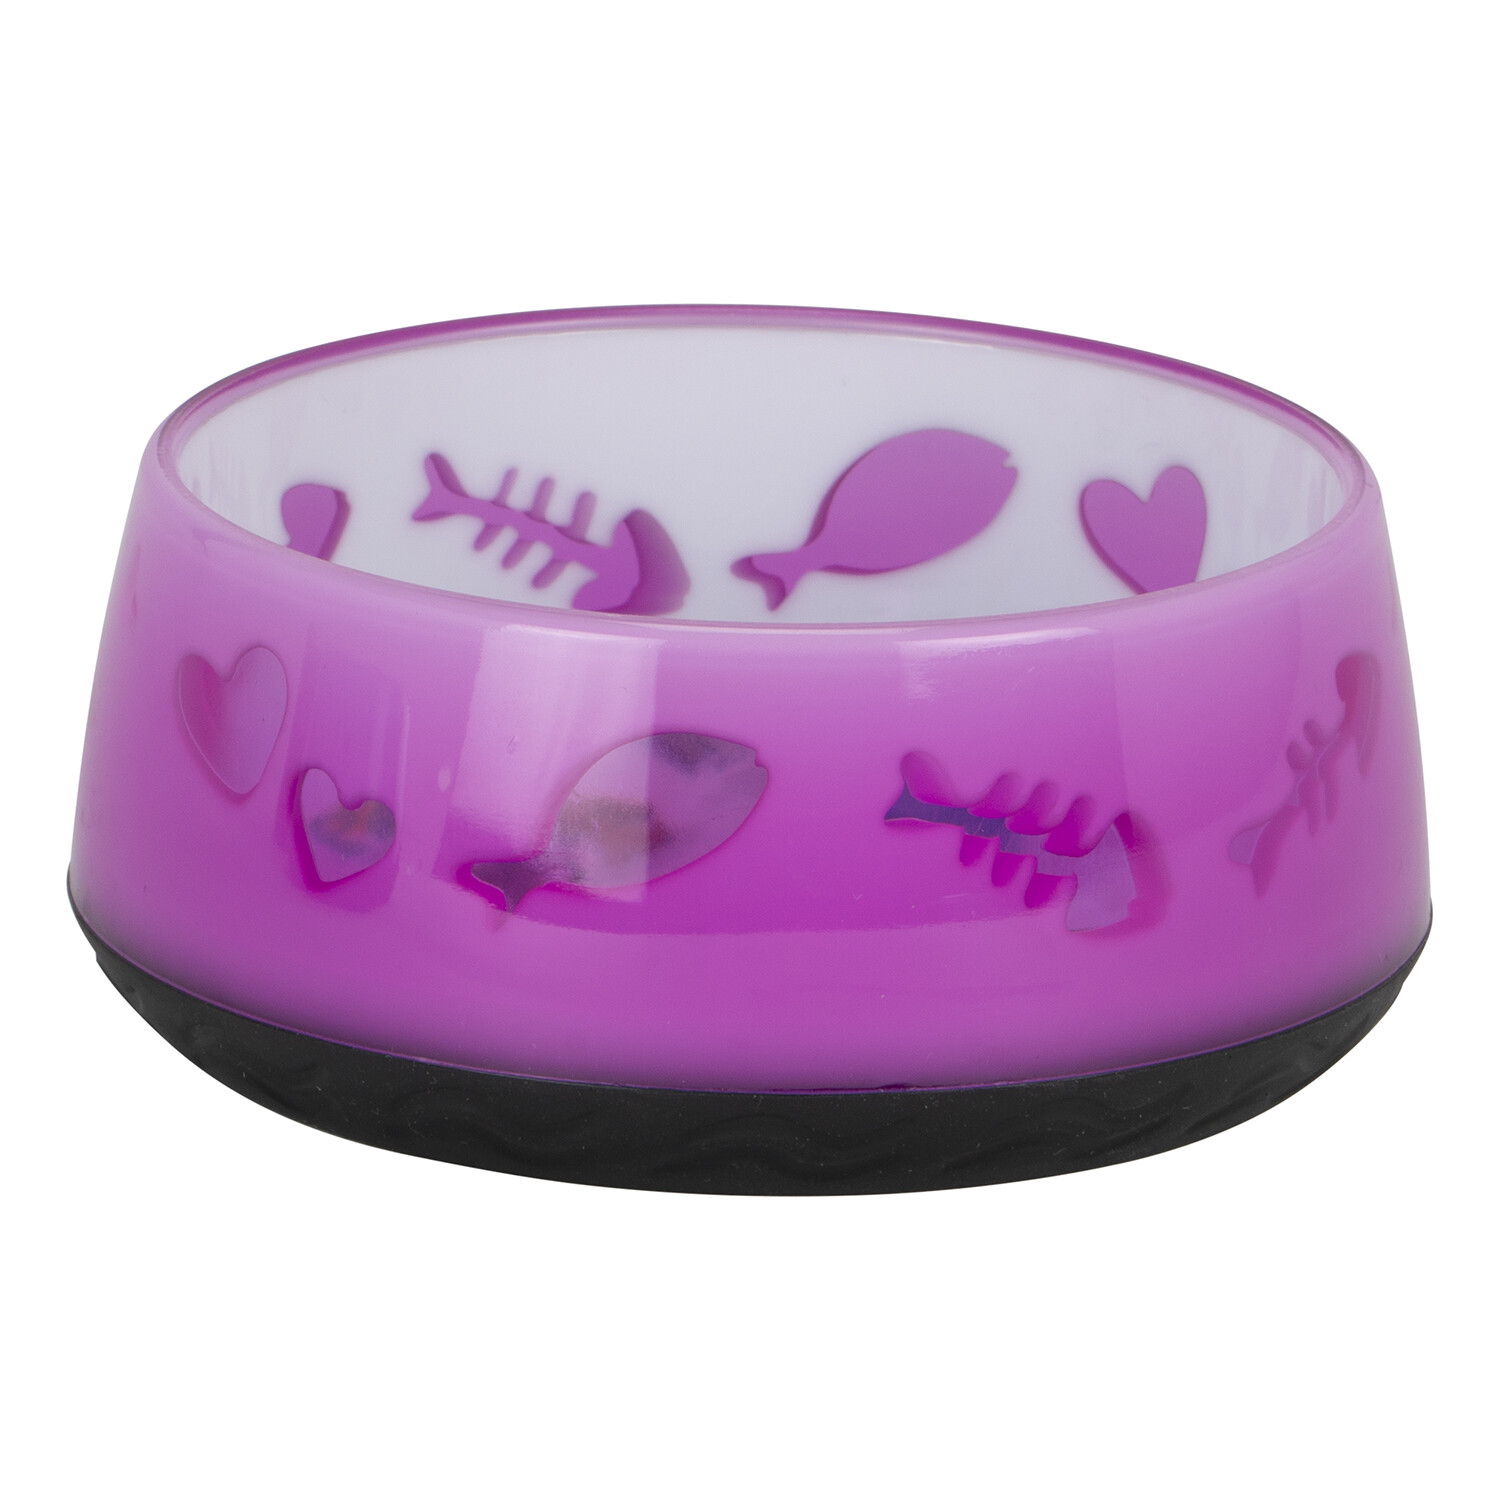 Clever Paws Neon Pet Bowl - Small Image 3